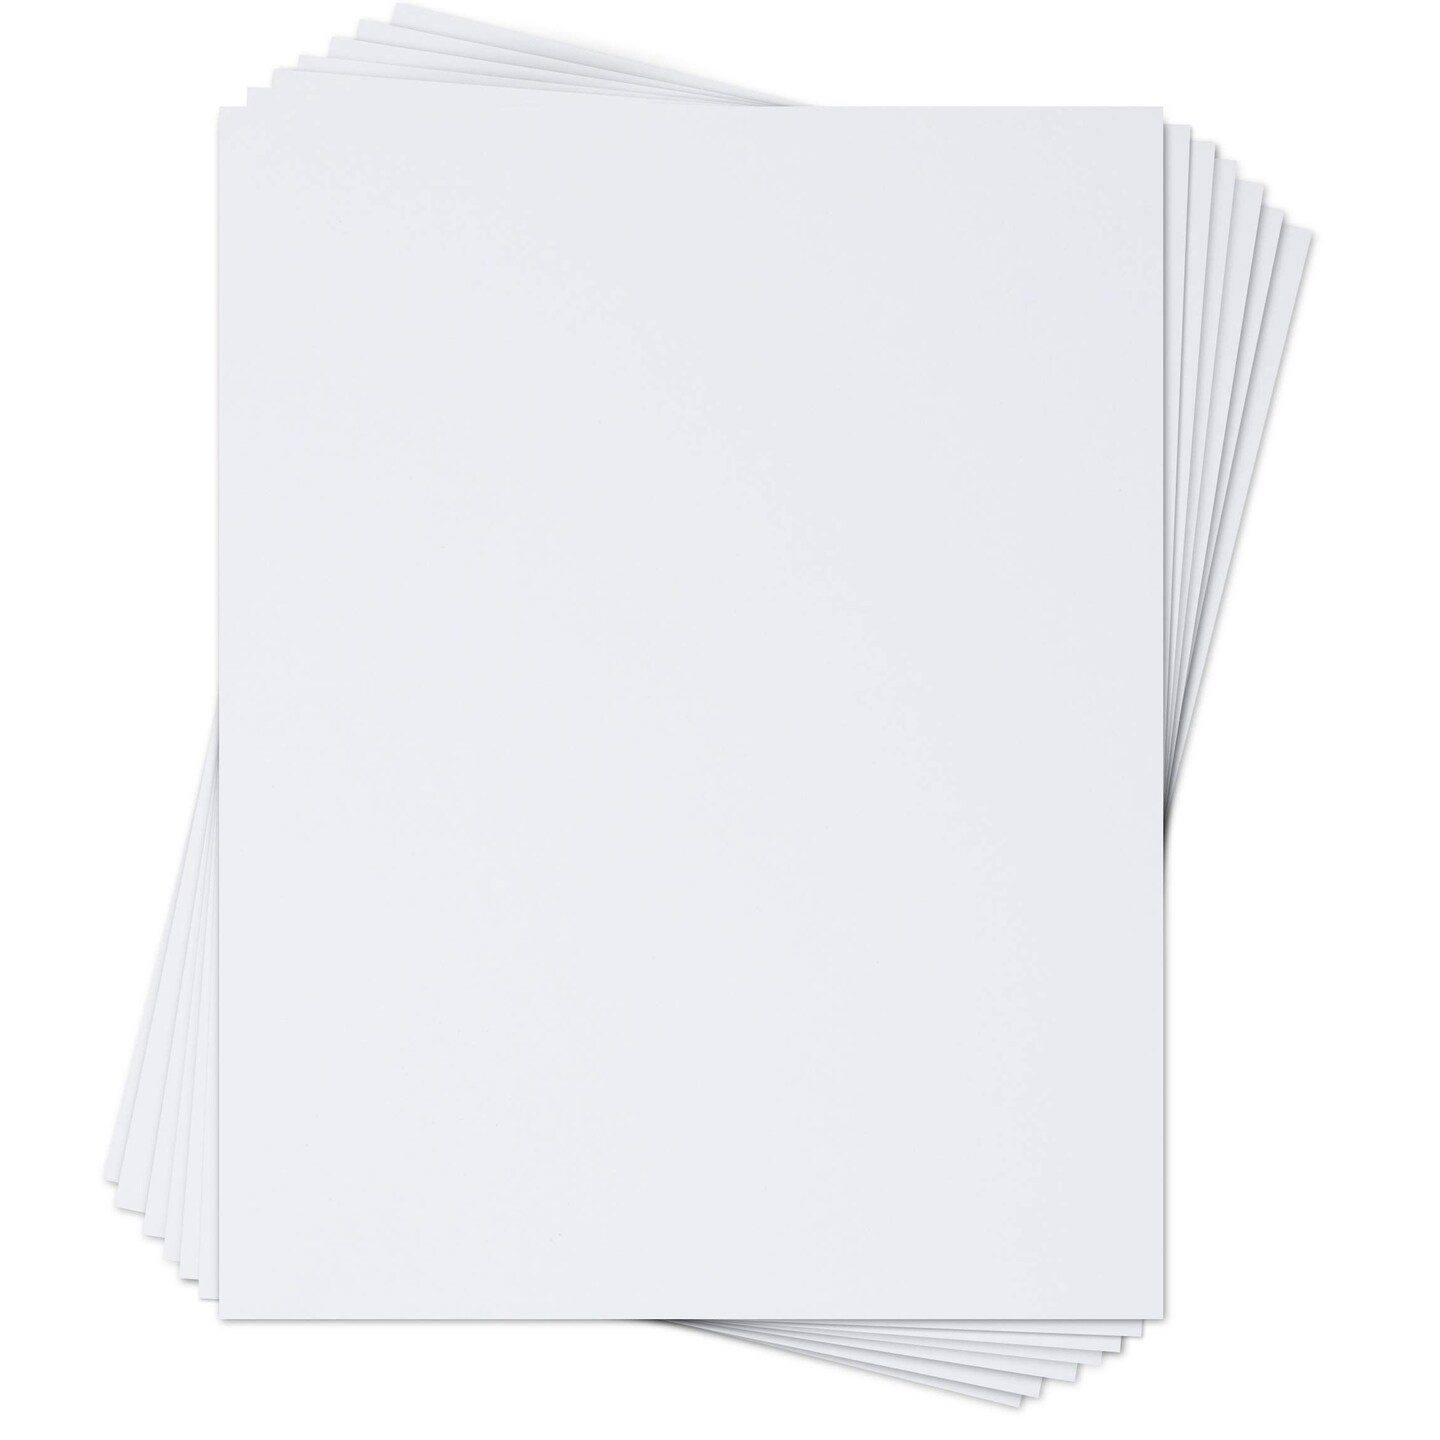  Frametory, 12x16 White Uncut Picture Mat Boards, Backing Boards  for Frames, Photos, Crafts - Pack of 12